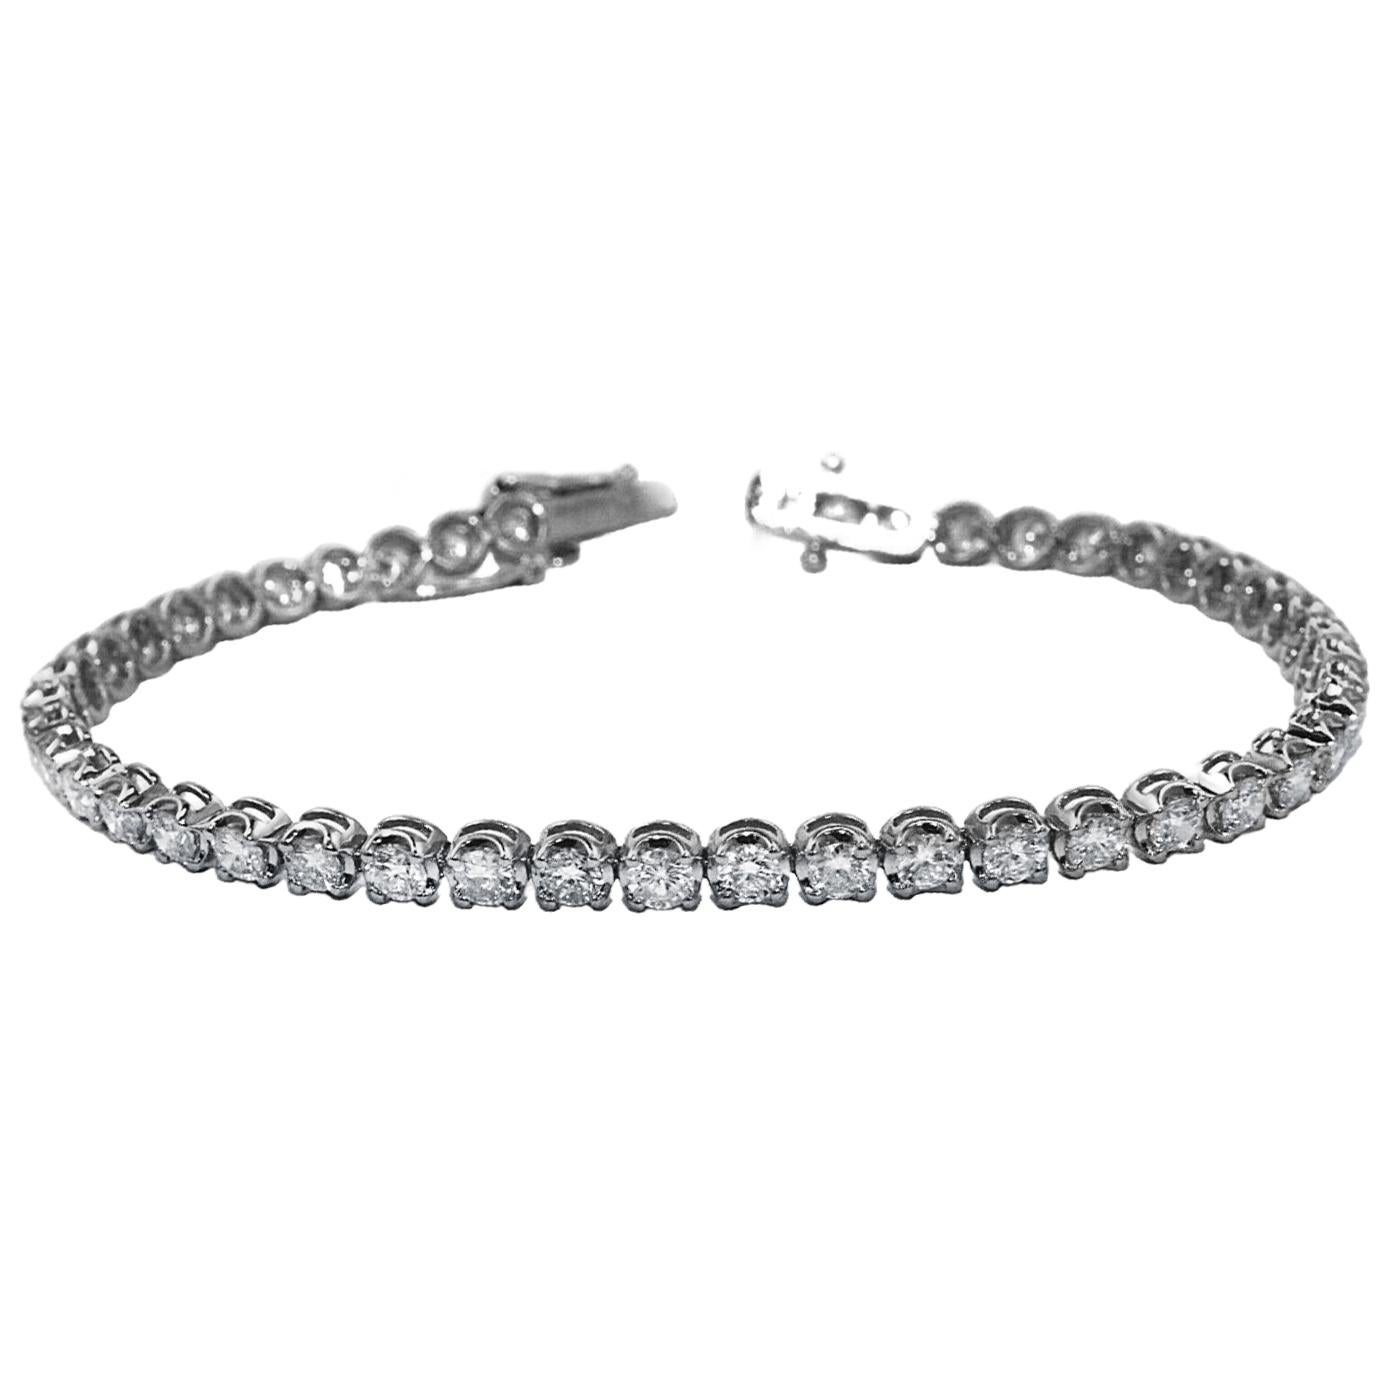 This spectacular 2ct tennis bracelet is crafted from 14K white gold and features 50 round-cut natural diamonds. The ultimate gift idea. The total diamond weight of this bracelet is 2ct. The diamonds have VS clarity and H color. This diamond bracelet